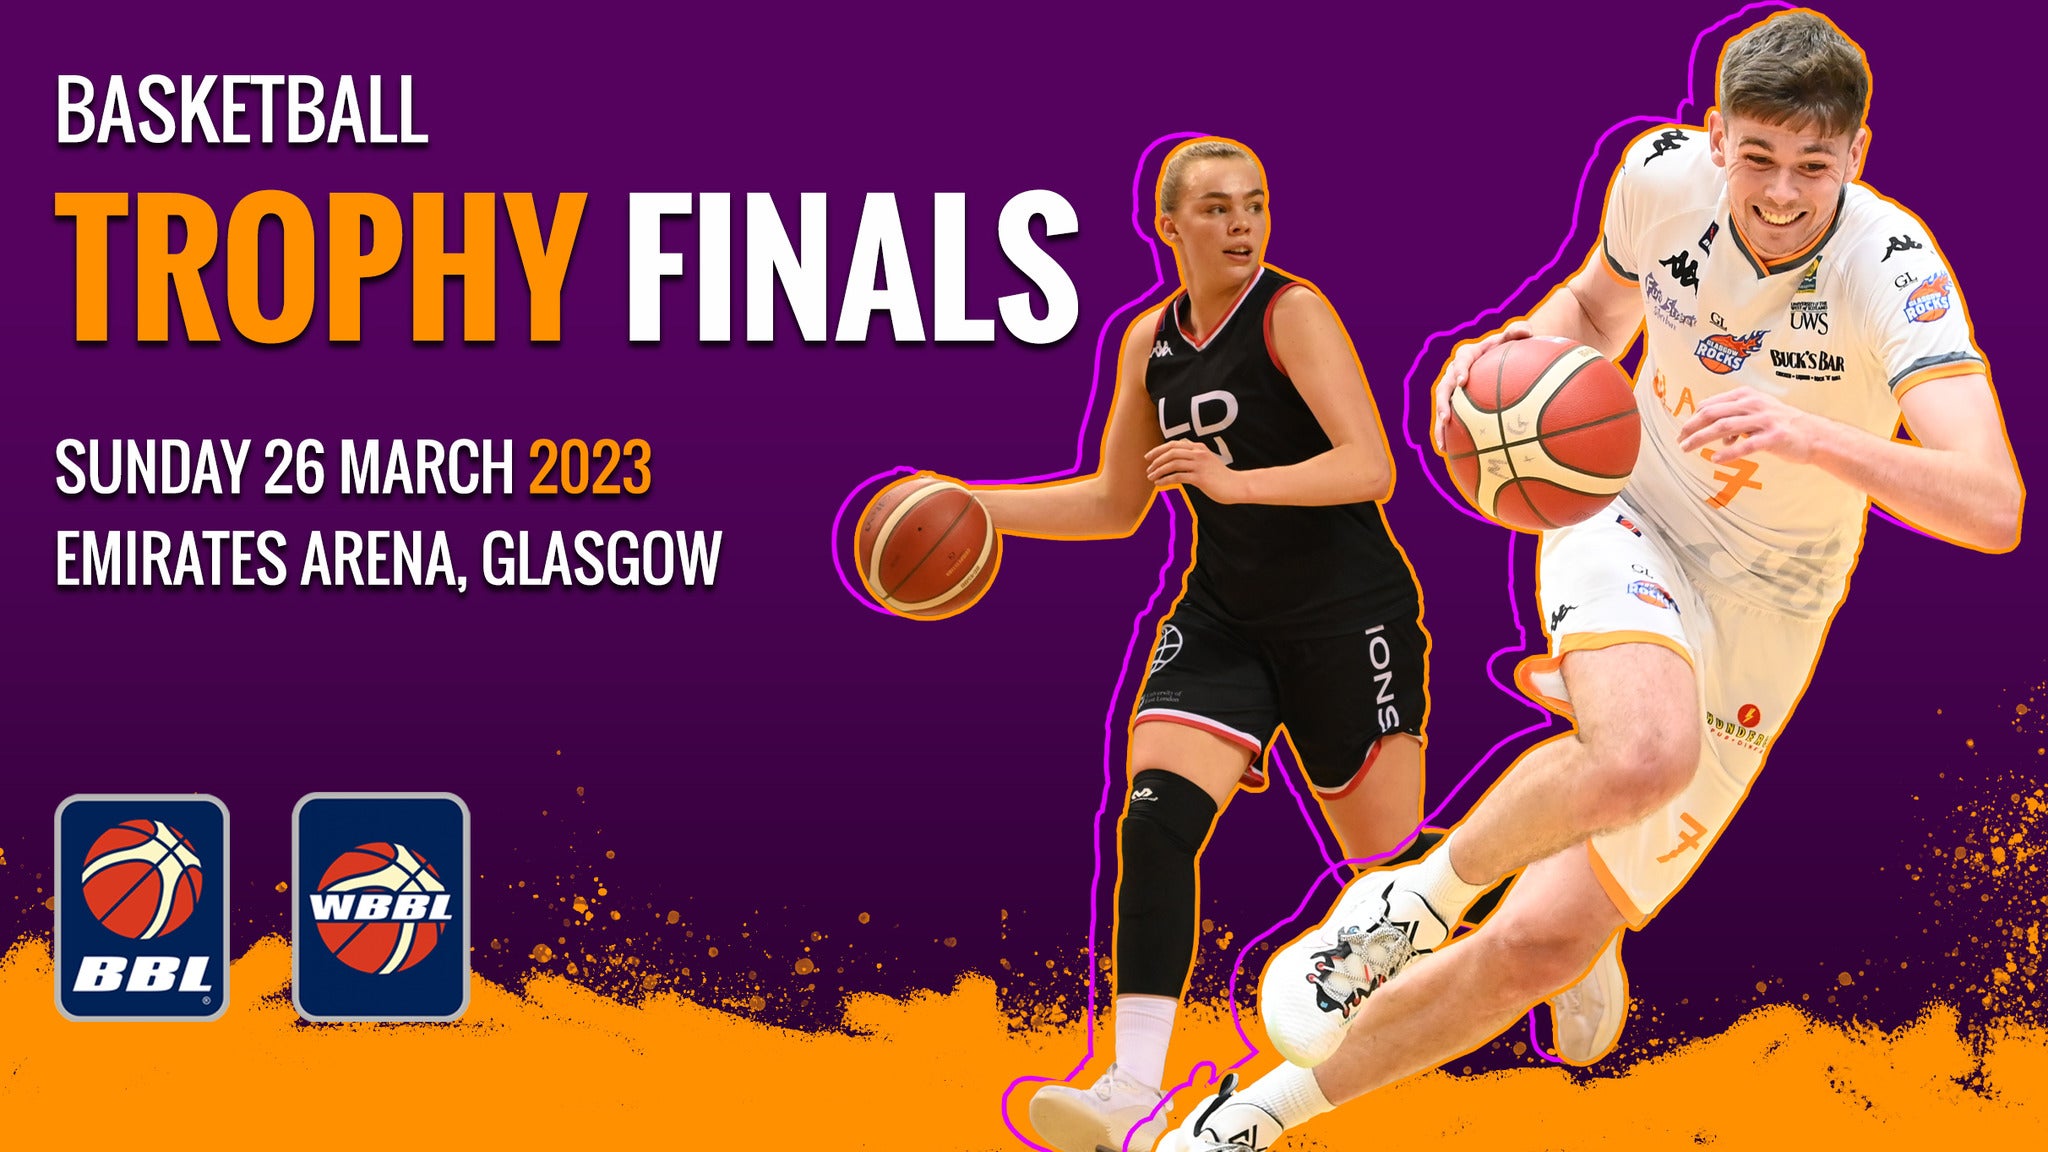 BBL - British Basketball League Trophy Finals 2024 - Weekend Ticket in Birmingham promo photo for Ticketmaster presale offer code